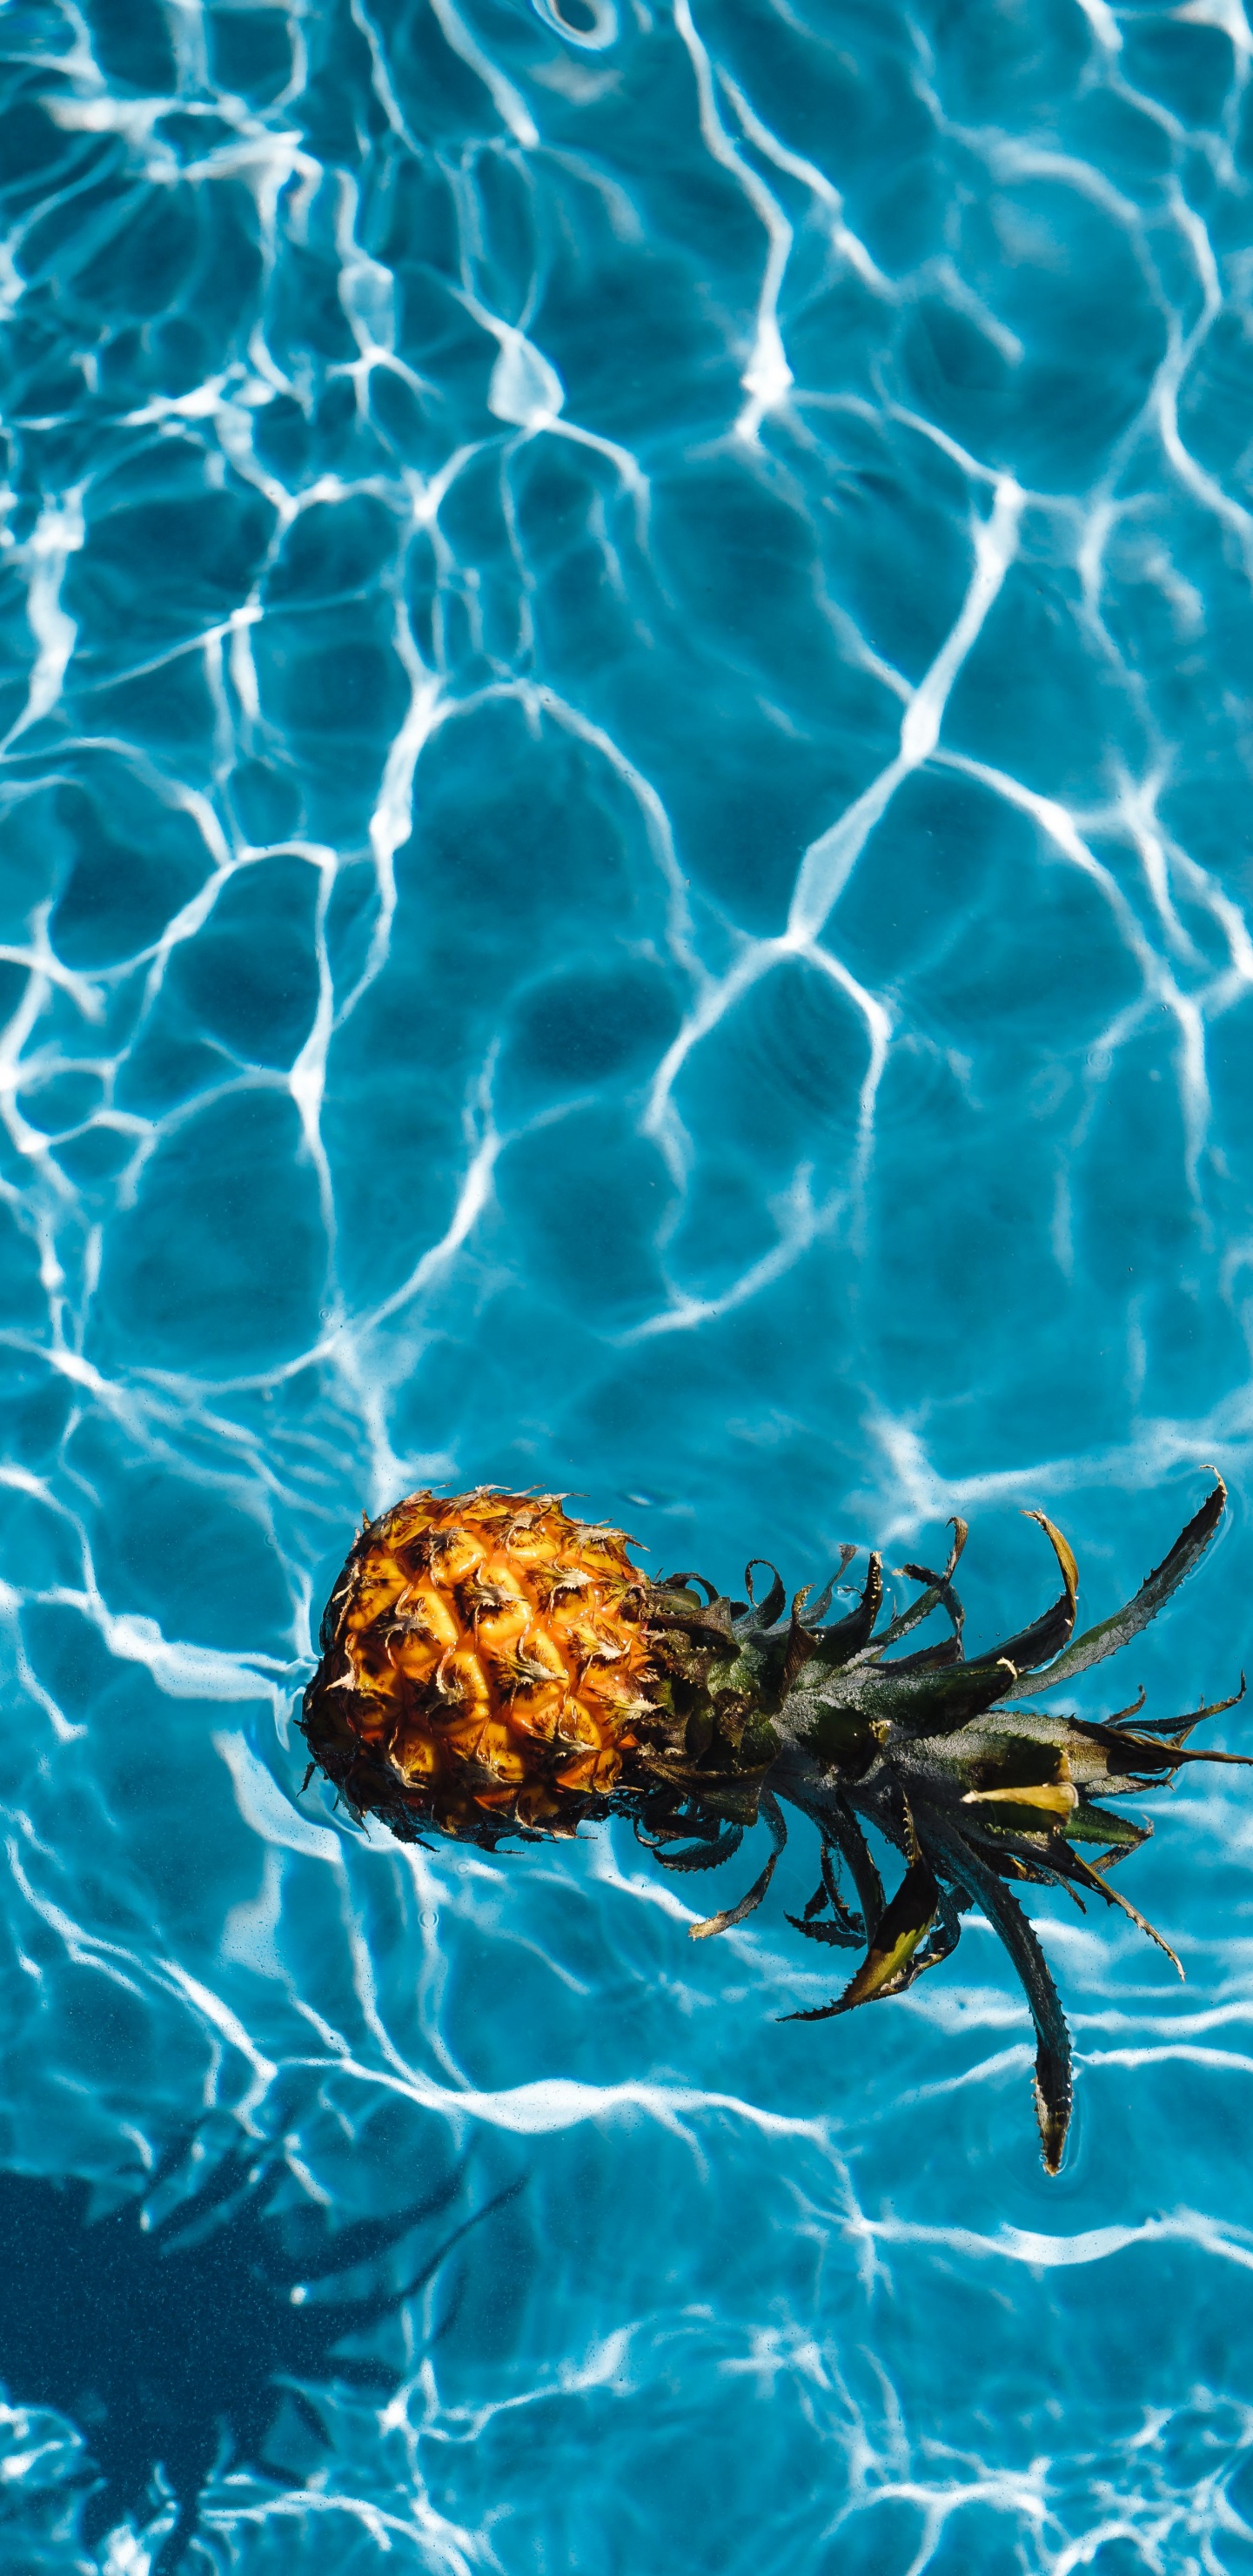 Brown and Green Pineapple Floating on Water. Wallpaper in 1440x2960 Resolution